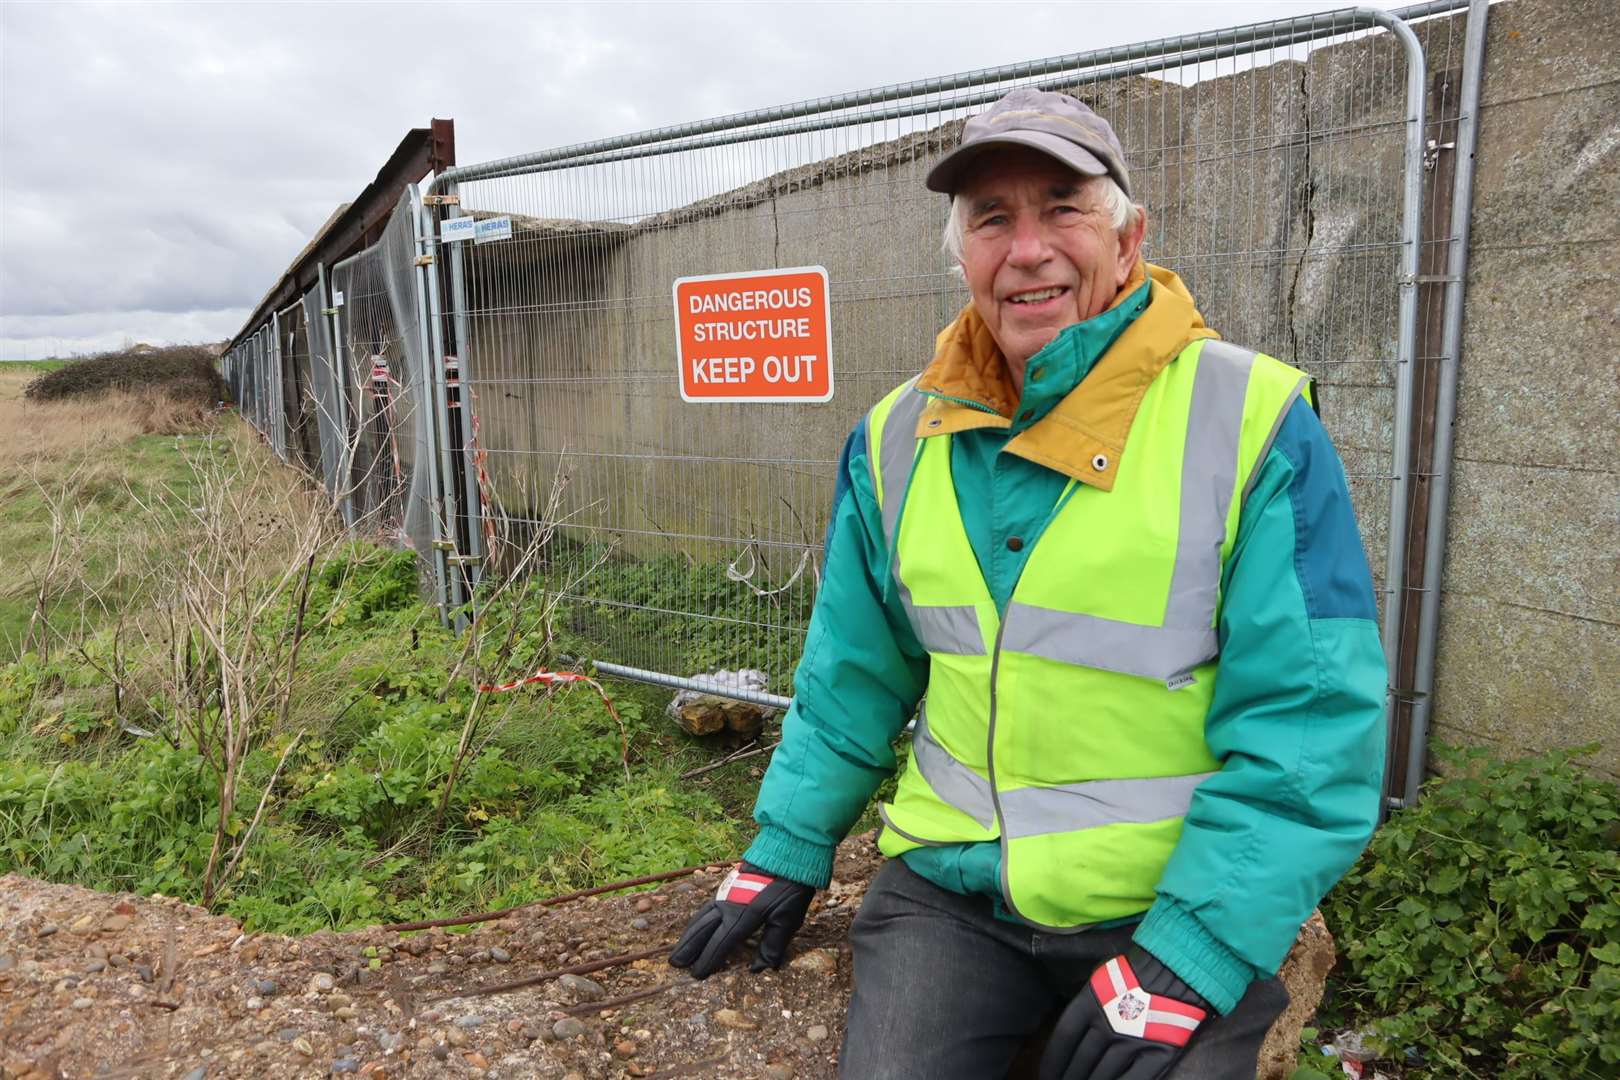 Bernie Watson has plans to build beach huts or lakeside cabins along the derelict covered way between Sheerness and Minster on the Isle of Sheppey